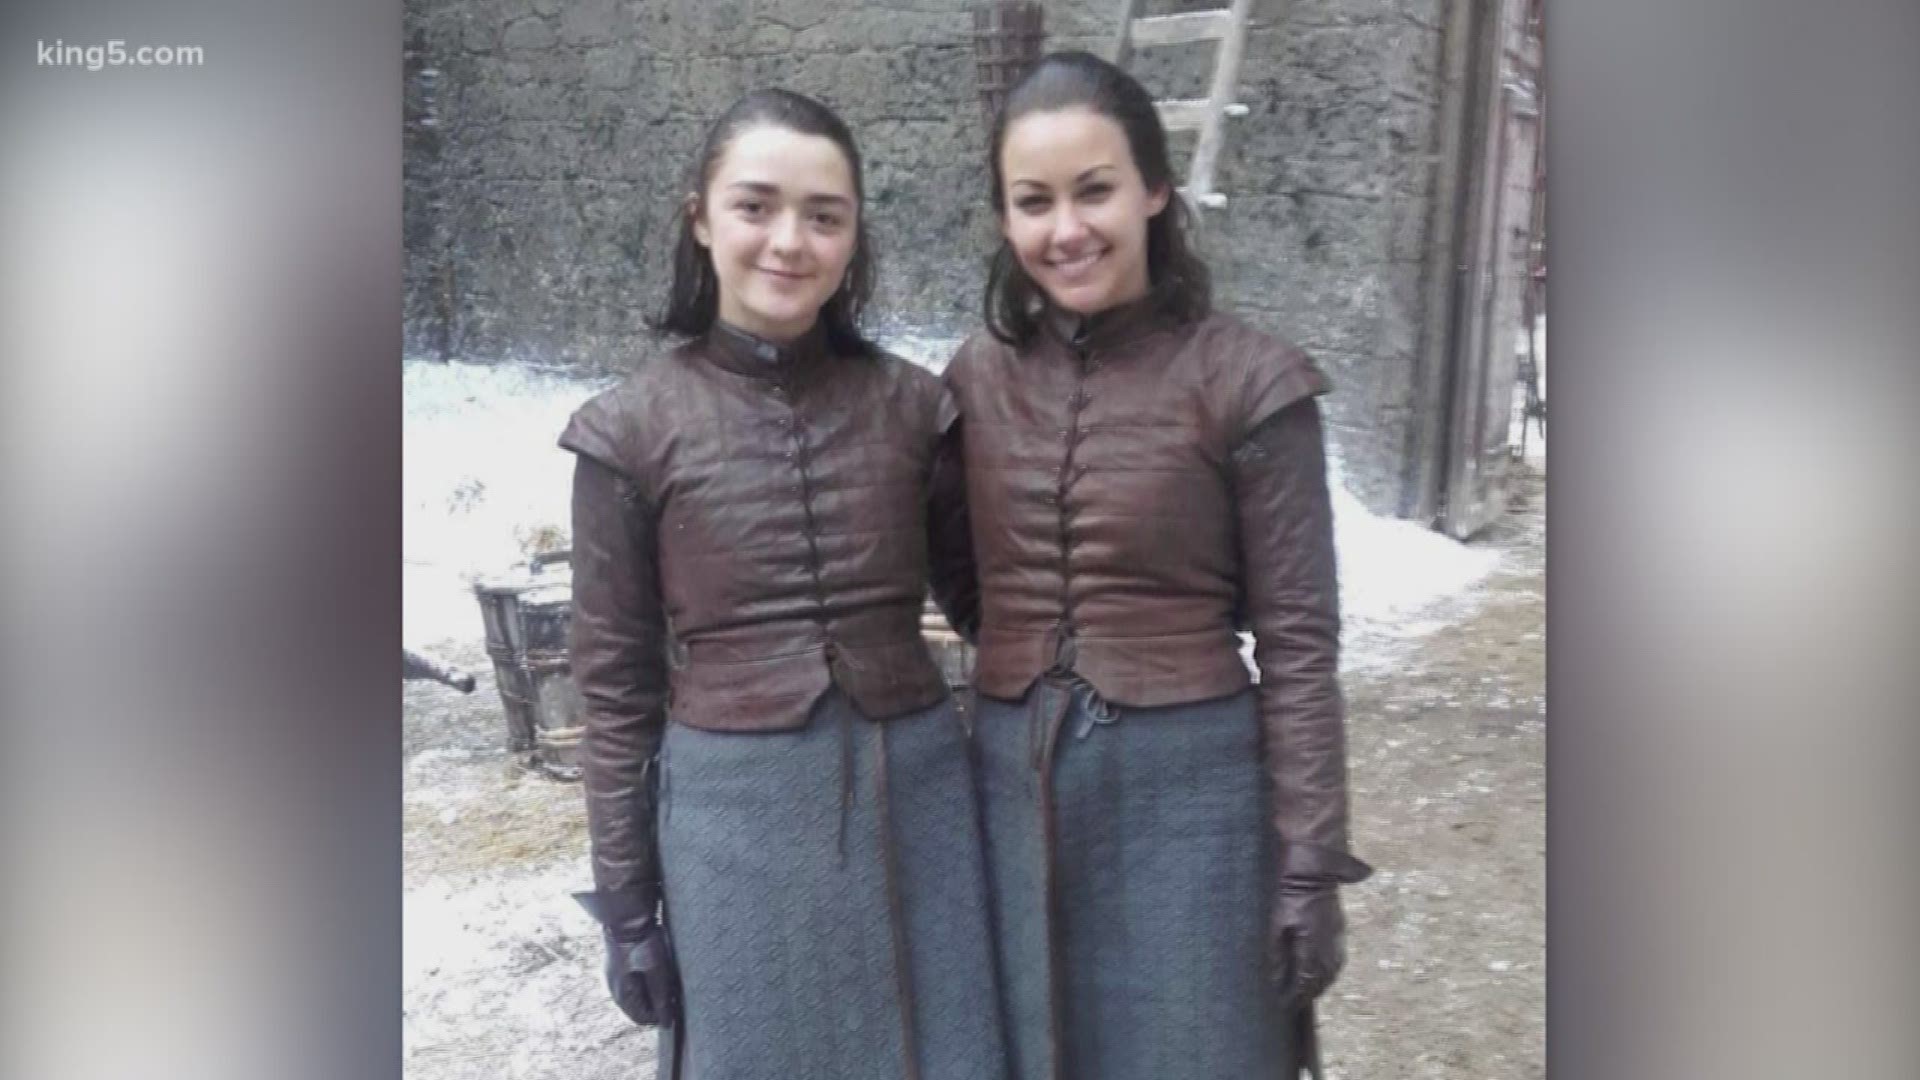 Kristina Baskett graduated from Mount Rainier High School before heading to The University of Utah on a scholarship. Most recently, she spent time as a stunt double on the HBO show ‘Game of Thrones.’